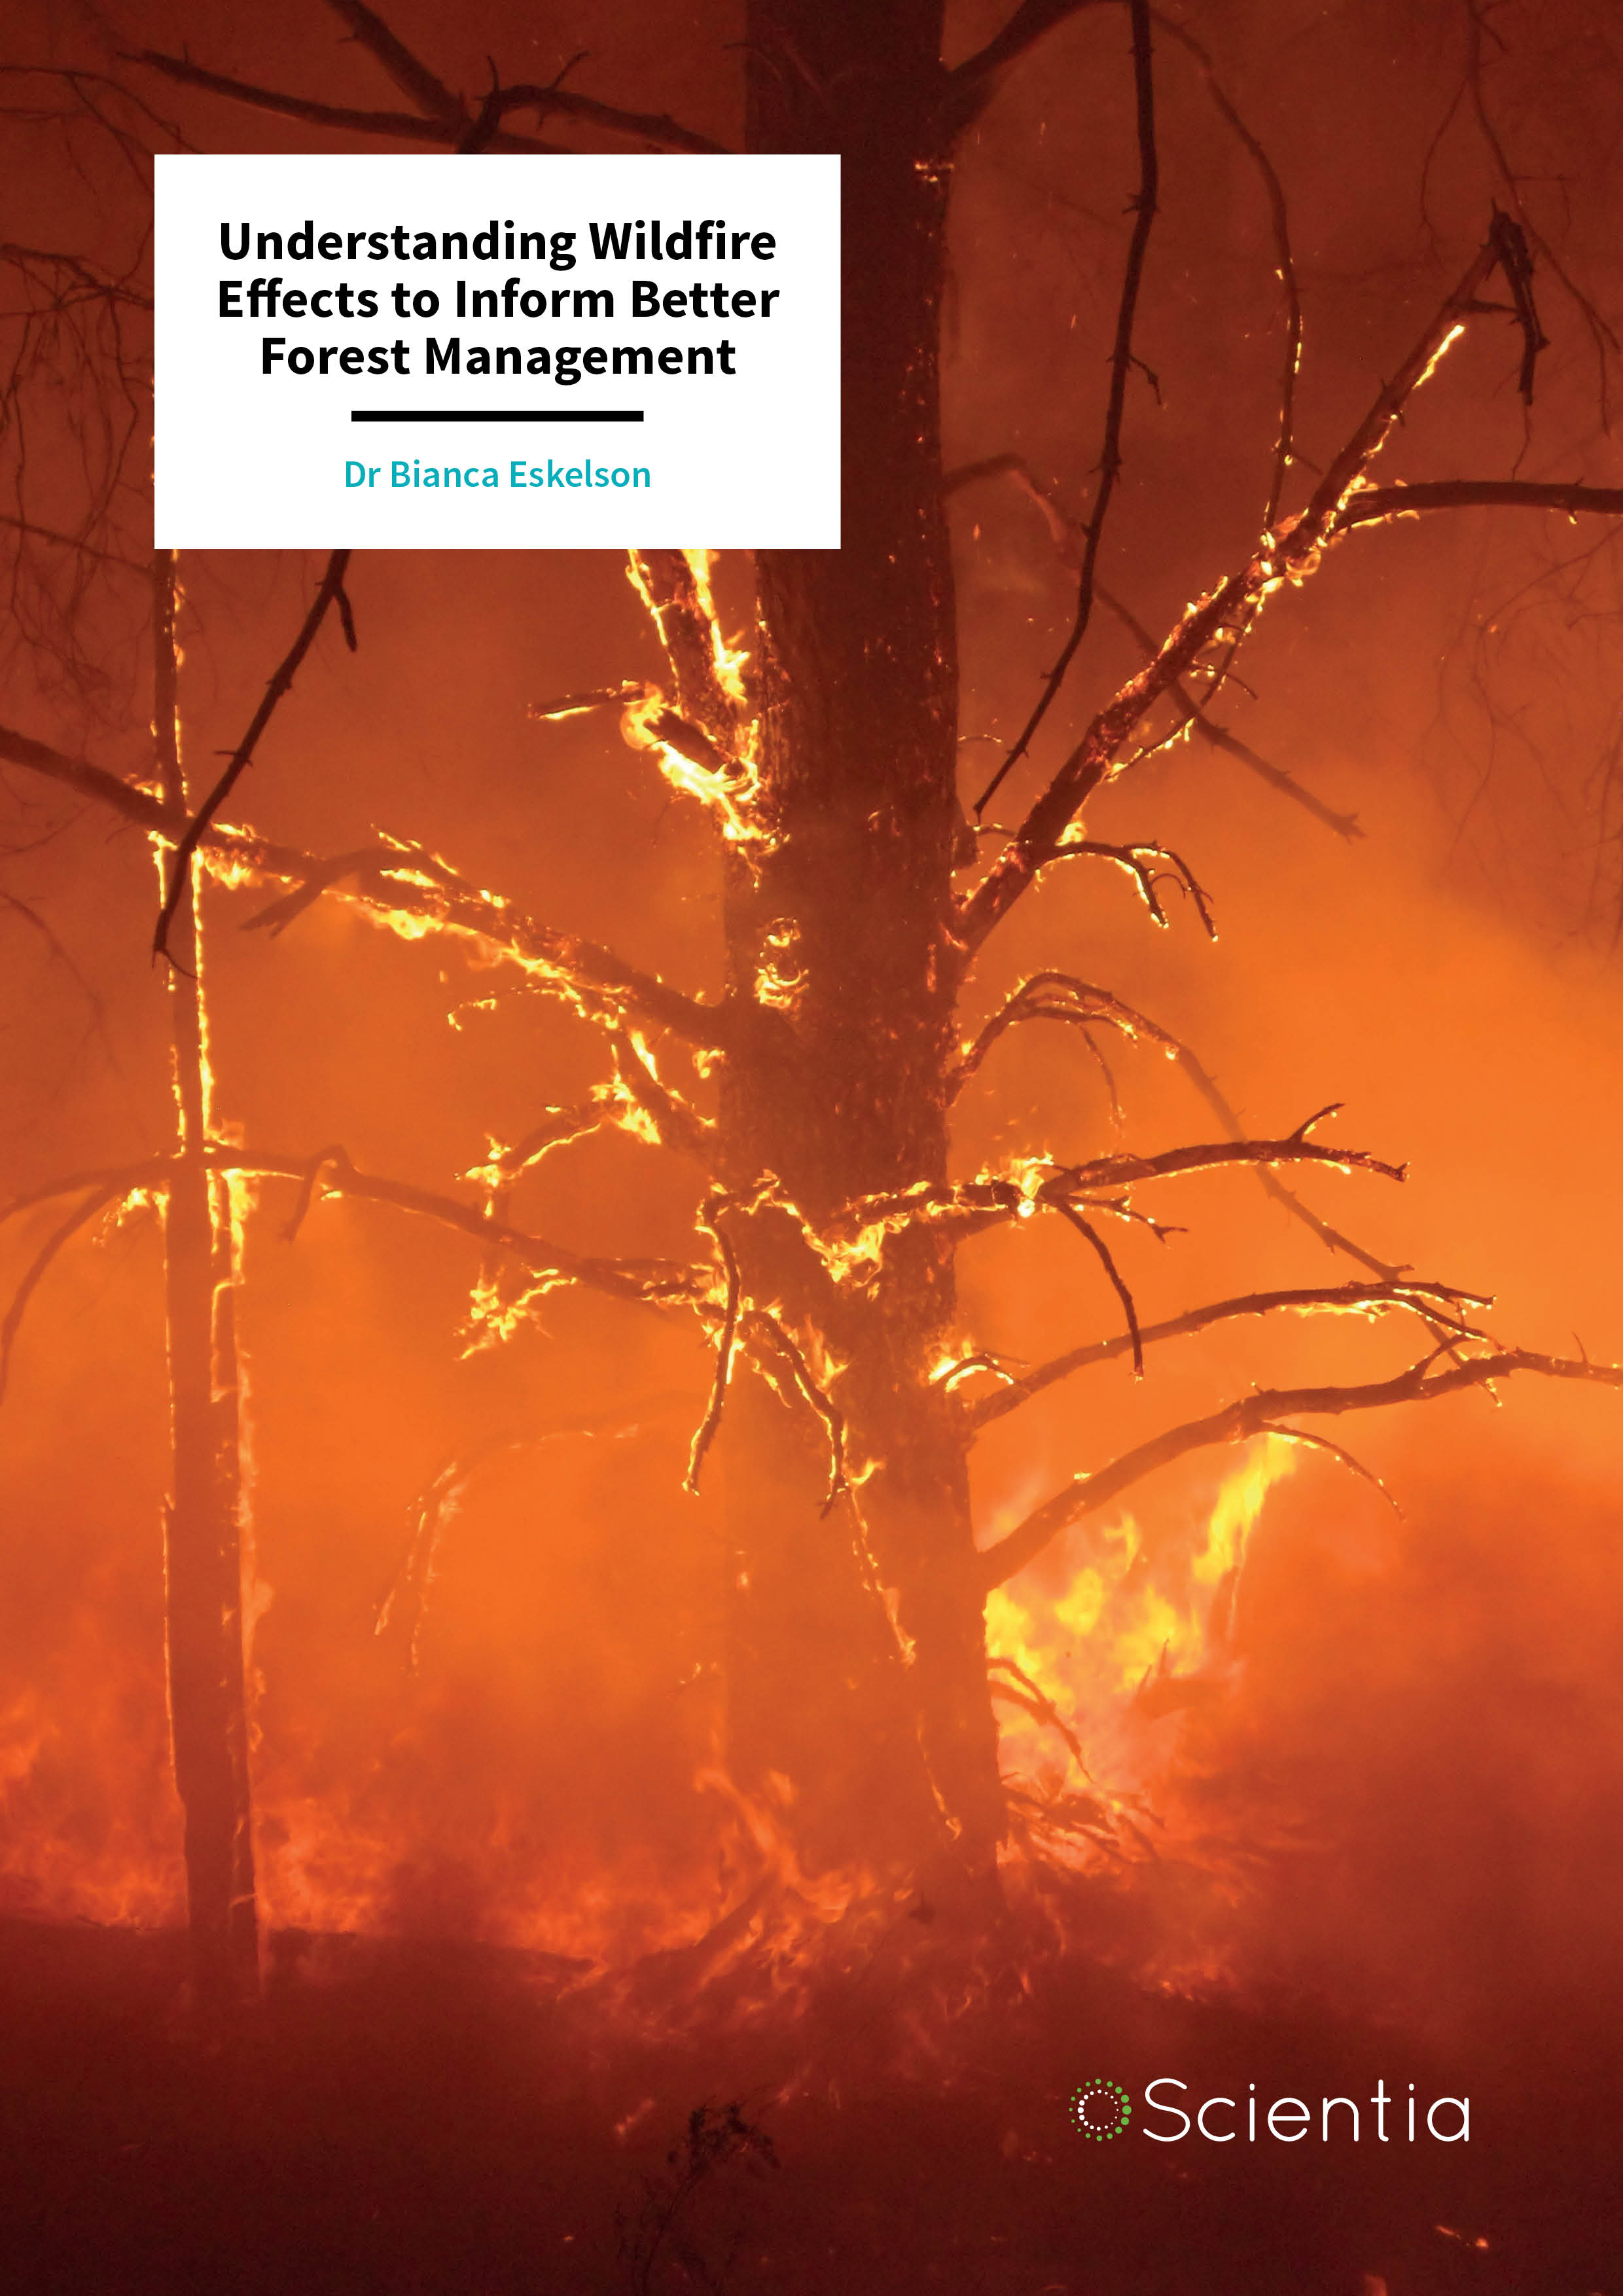 Dr Bianca Eskelson – Understanding Wildfire Effects to Inform Better Forest Management